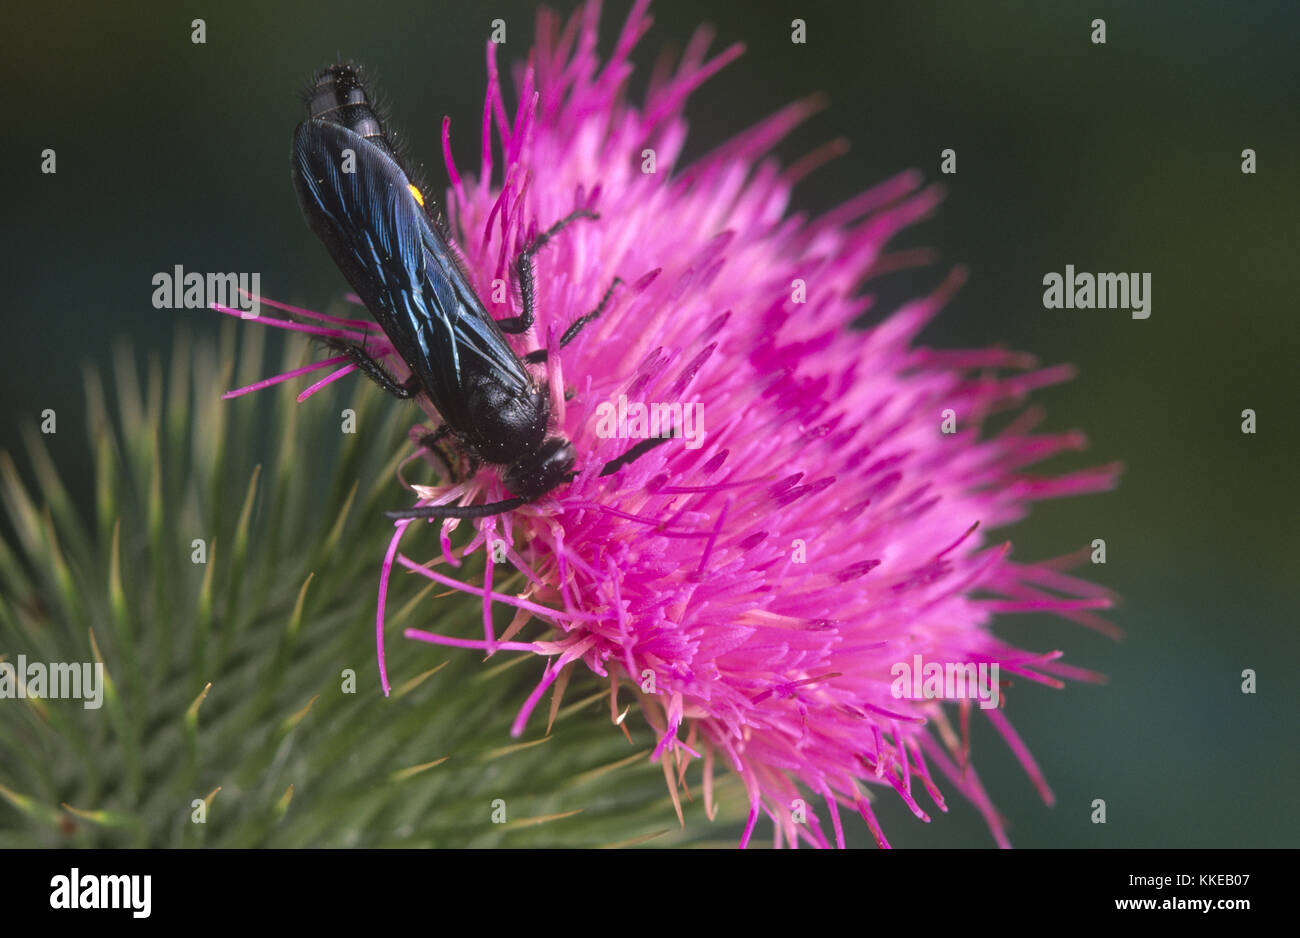 Hairy Flower Wasp (Scoliidae) on Scotch thistle flower Stock Photo